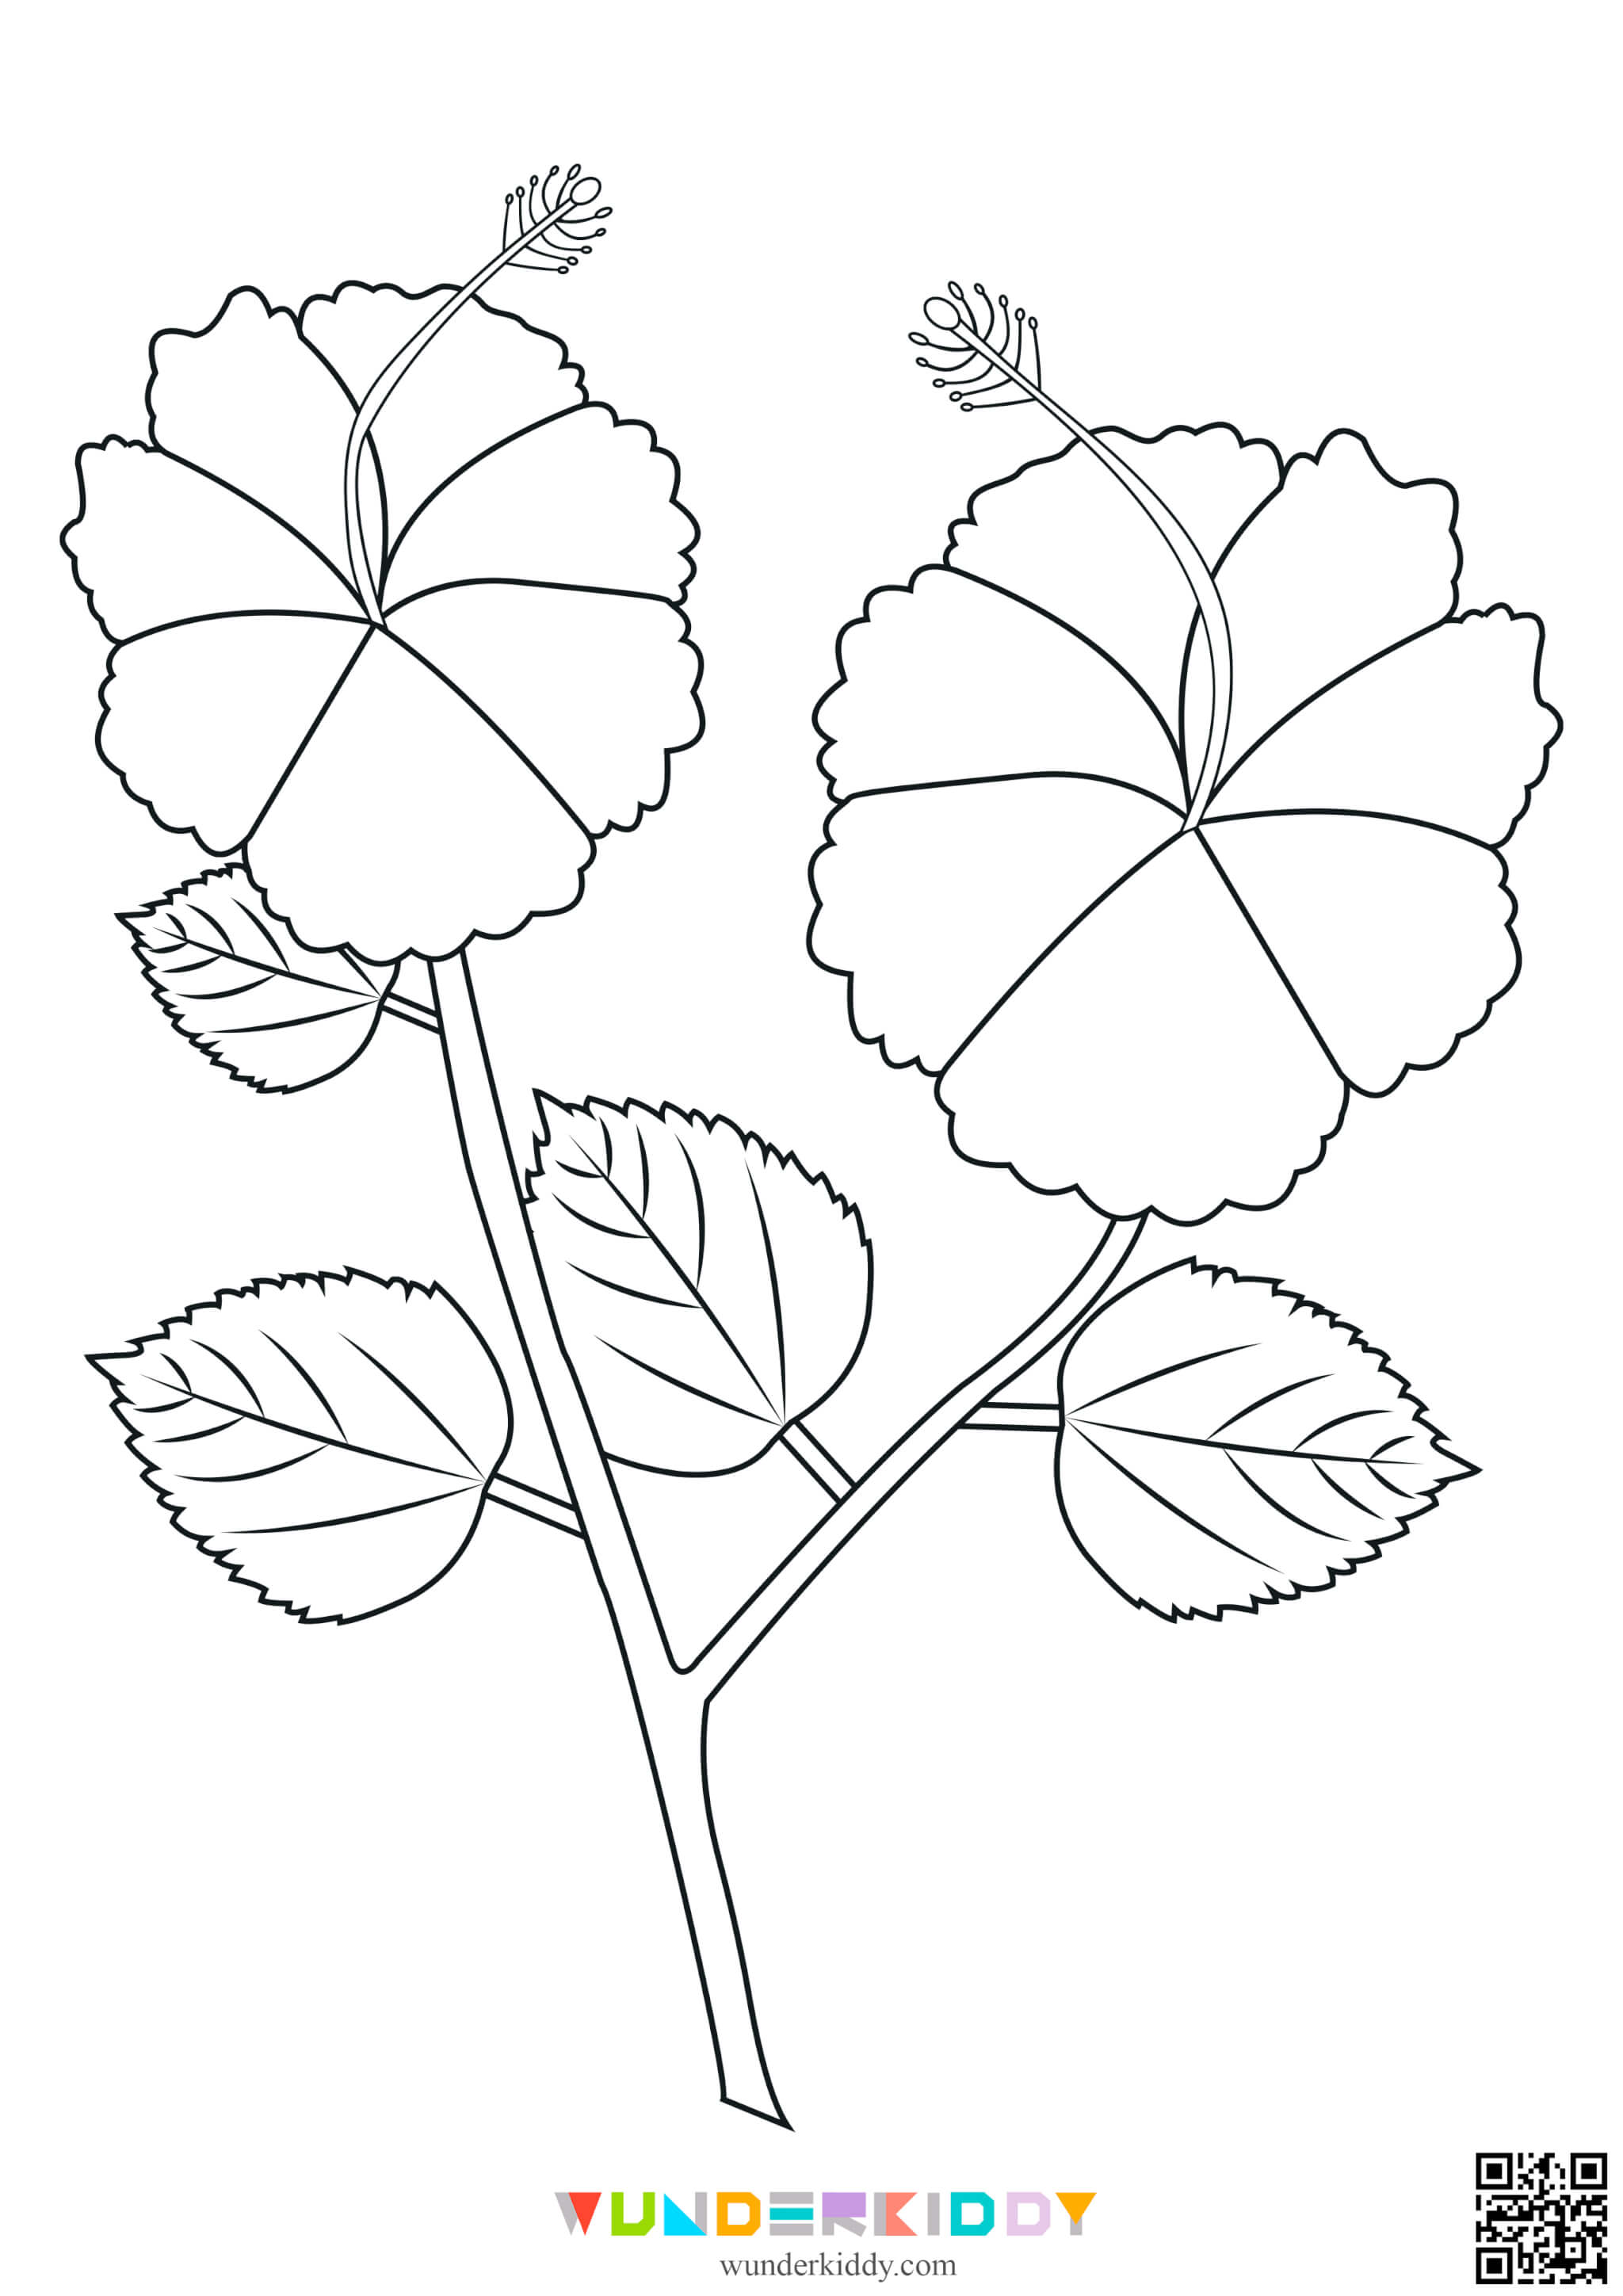 Flower Printable Coloring Pages - Image 25